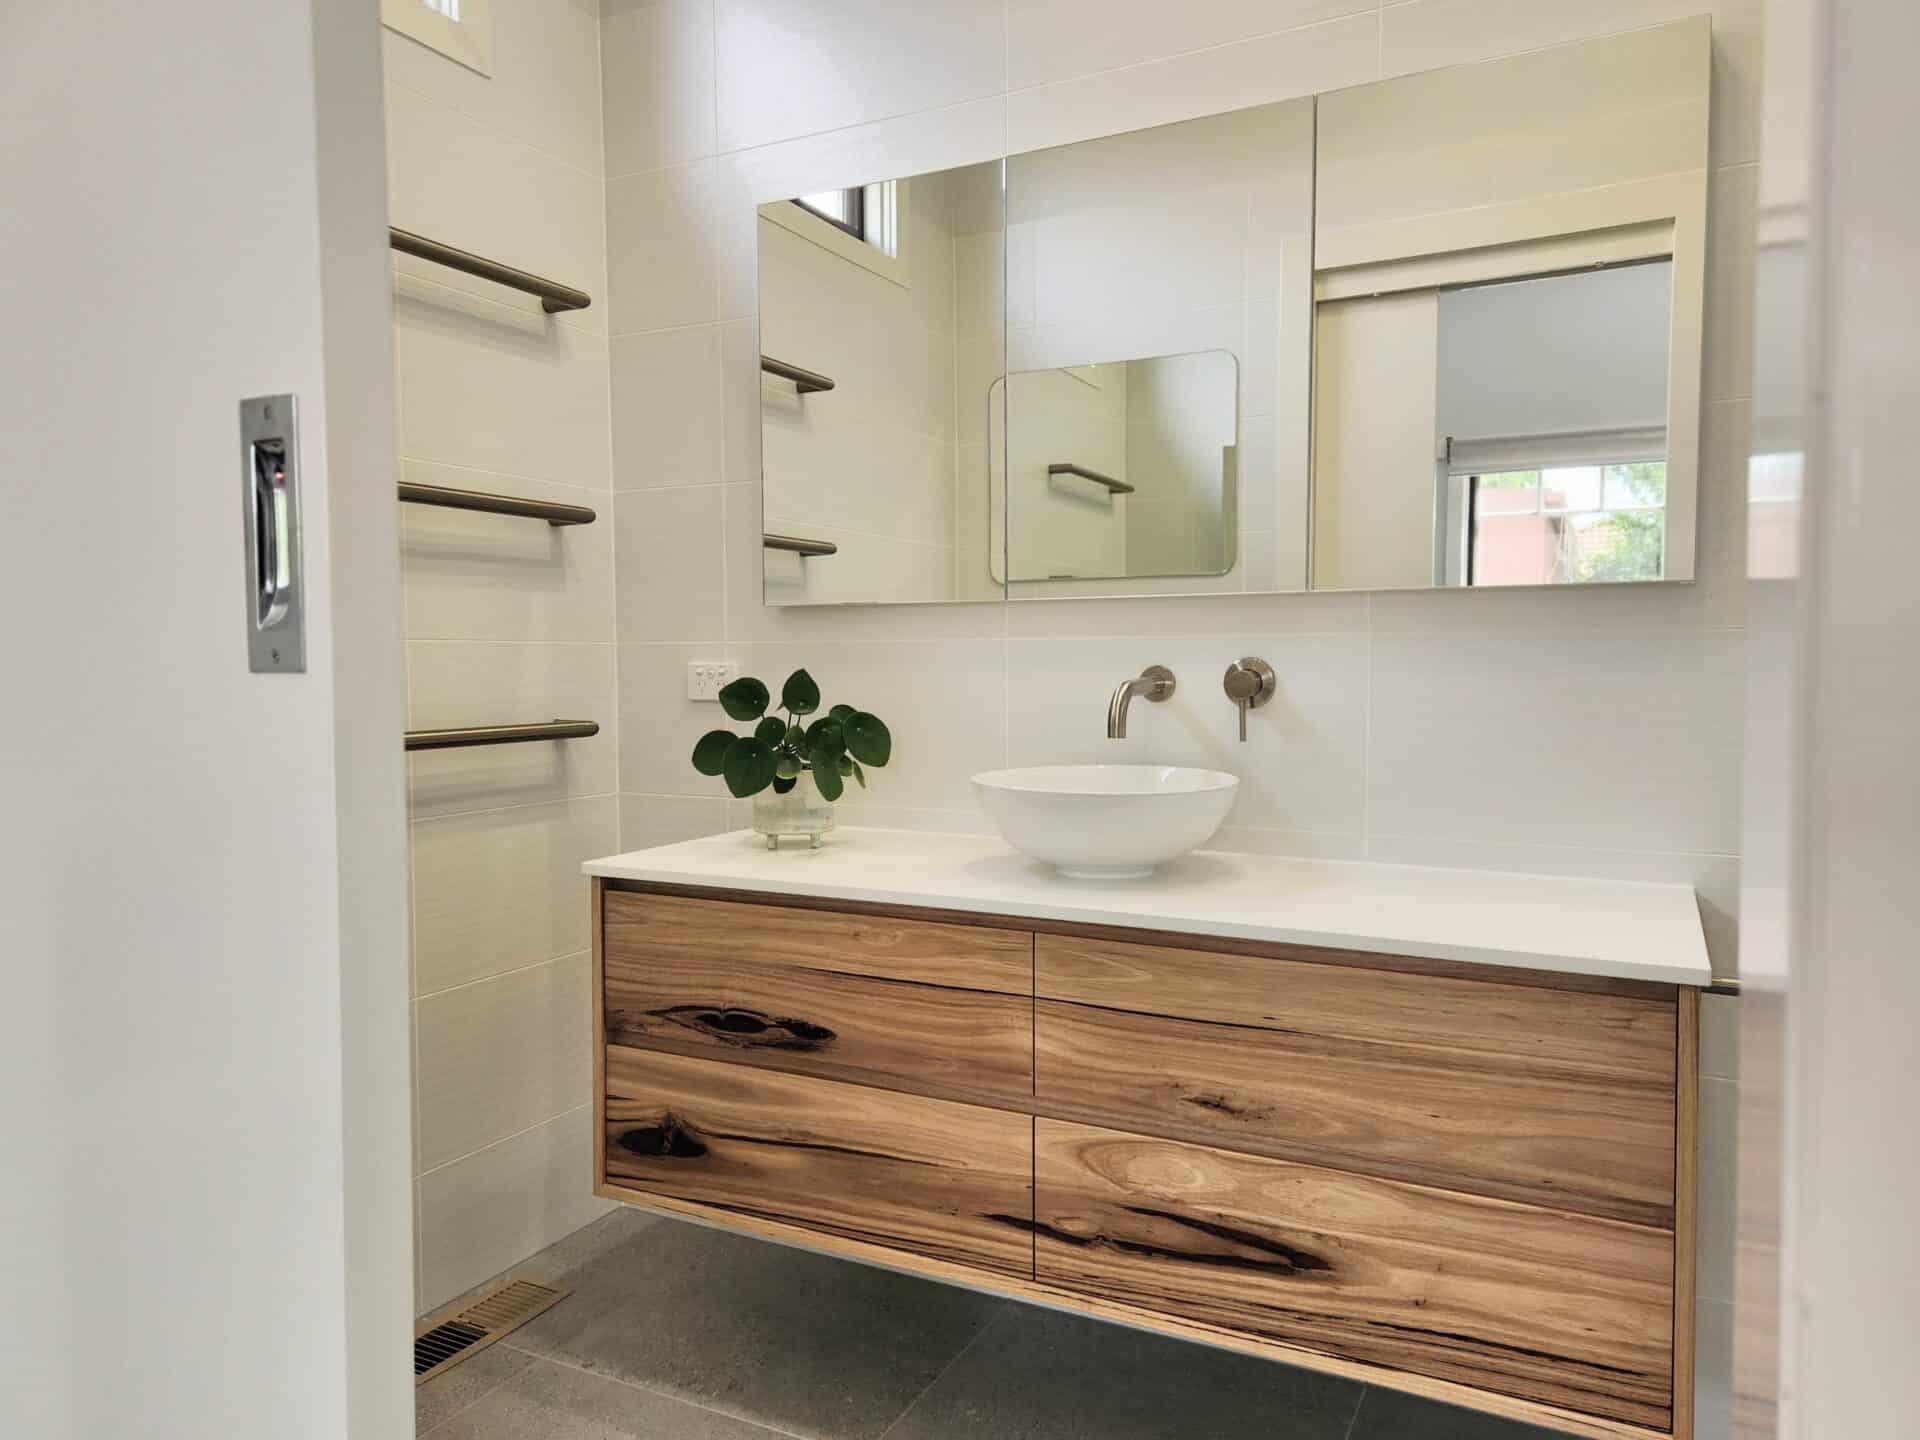 A white modern ensuite with wood cabinet and mirrors.